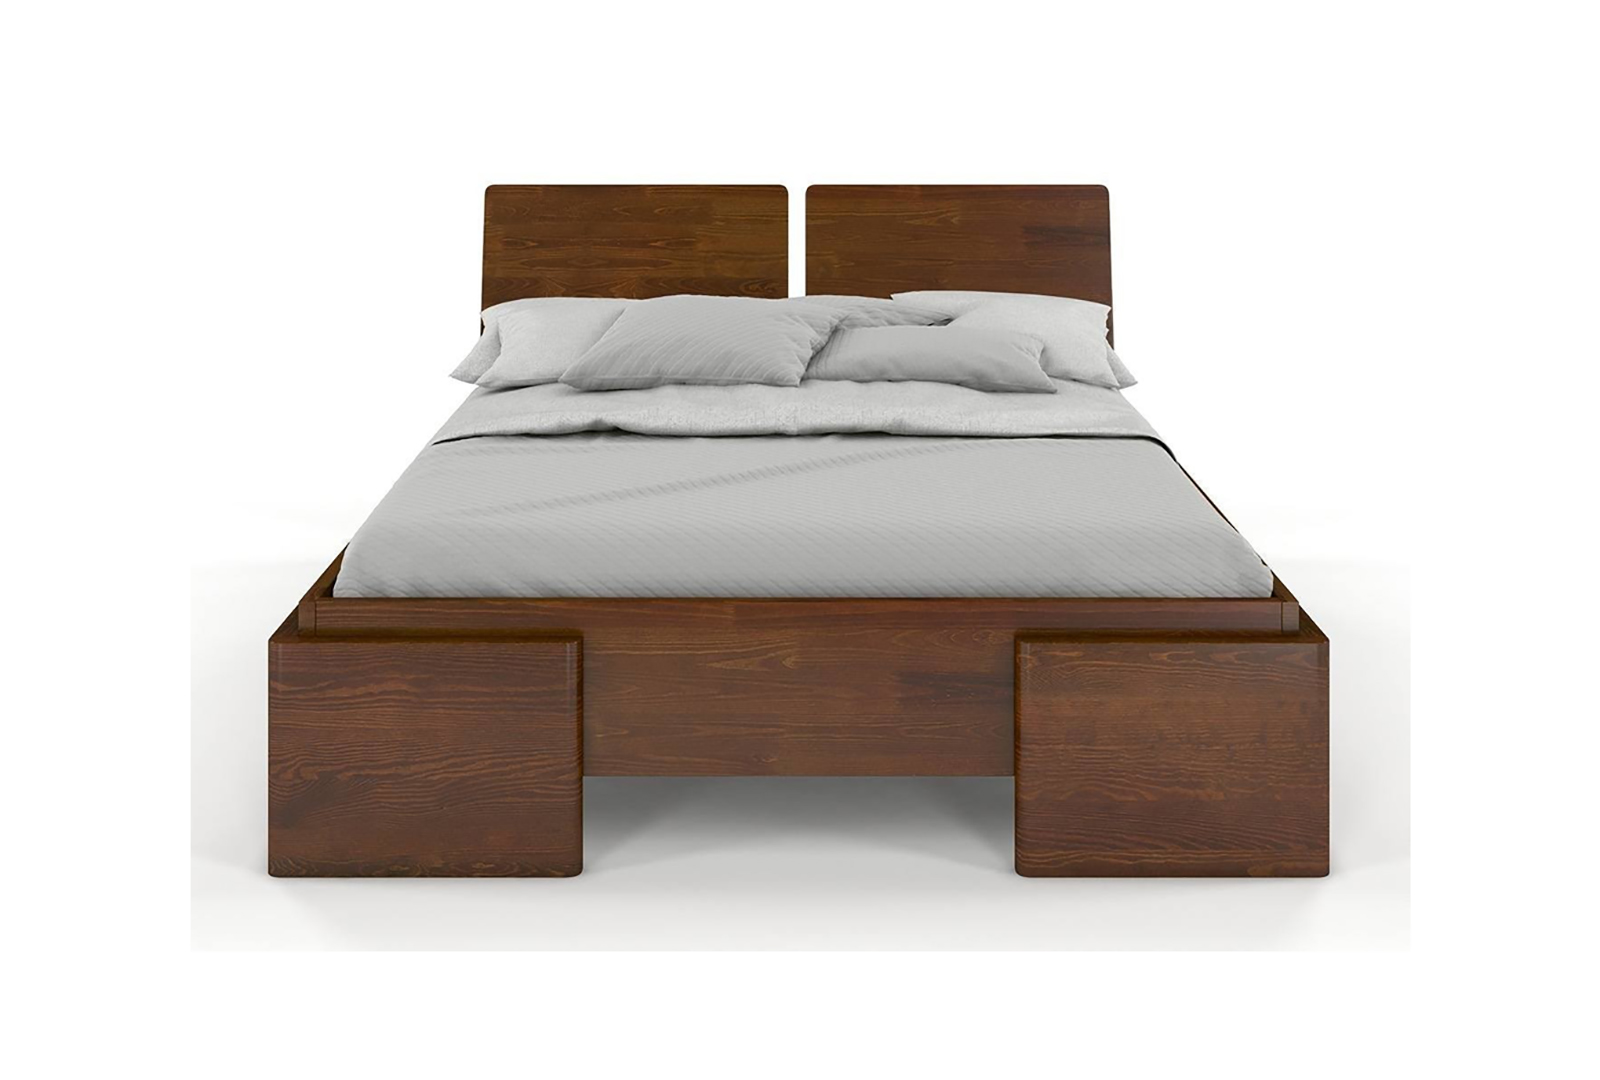 VISBY ARGENTO HIGH PINE BED 2